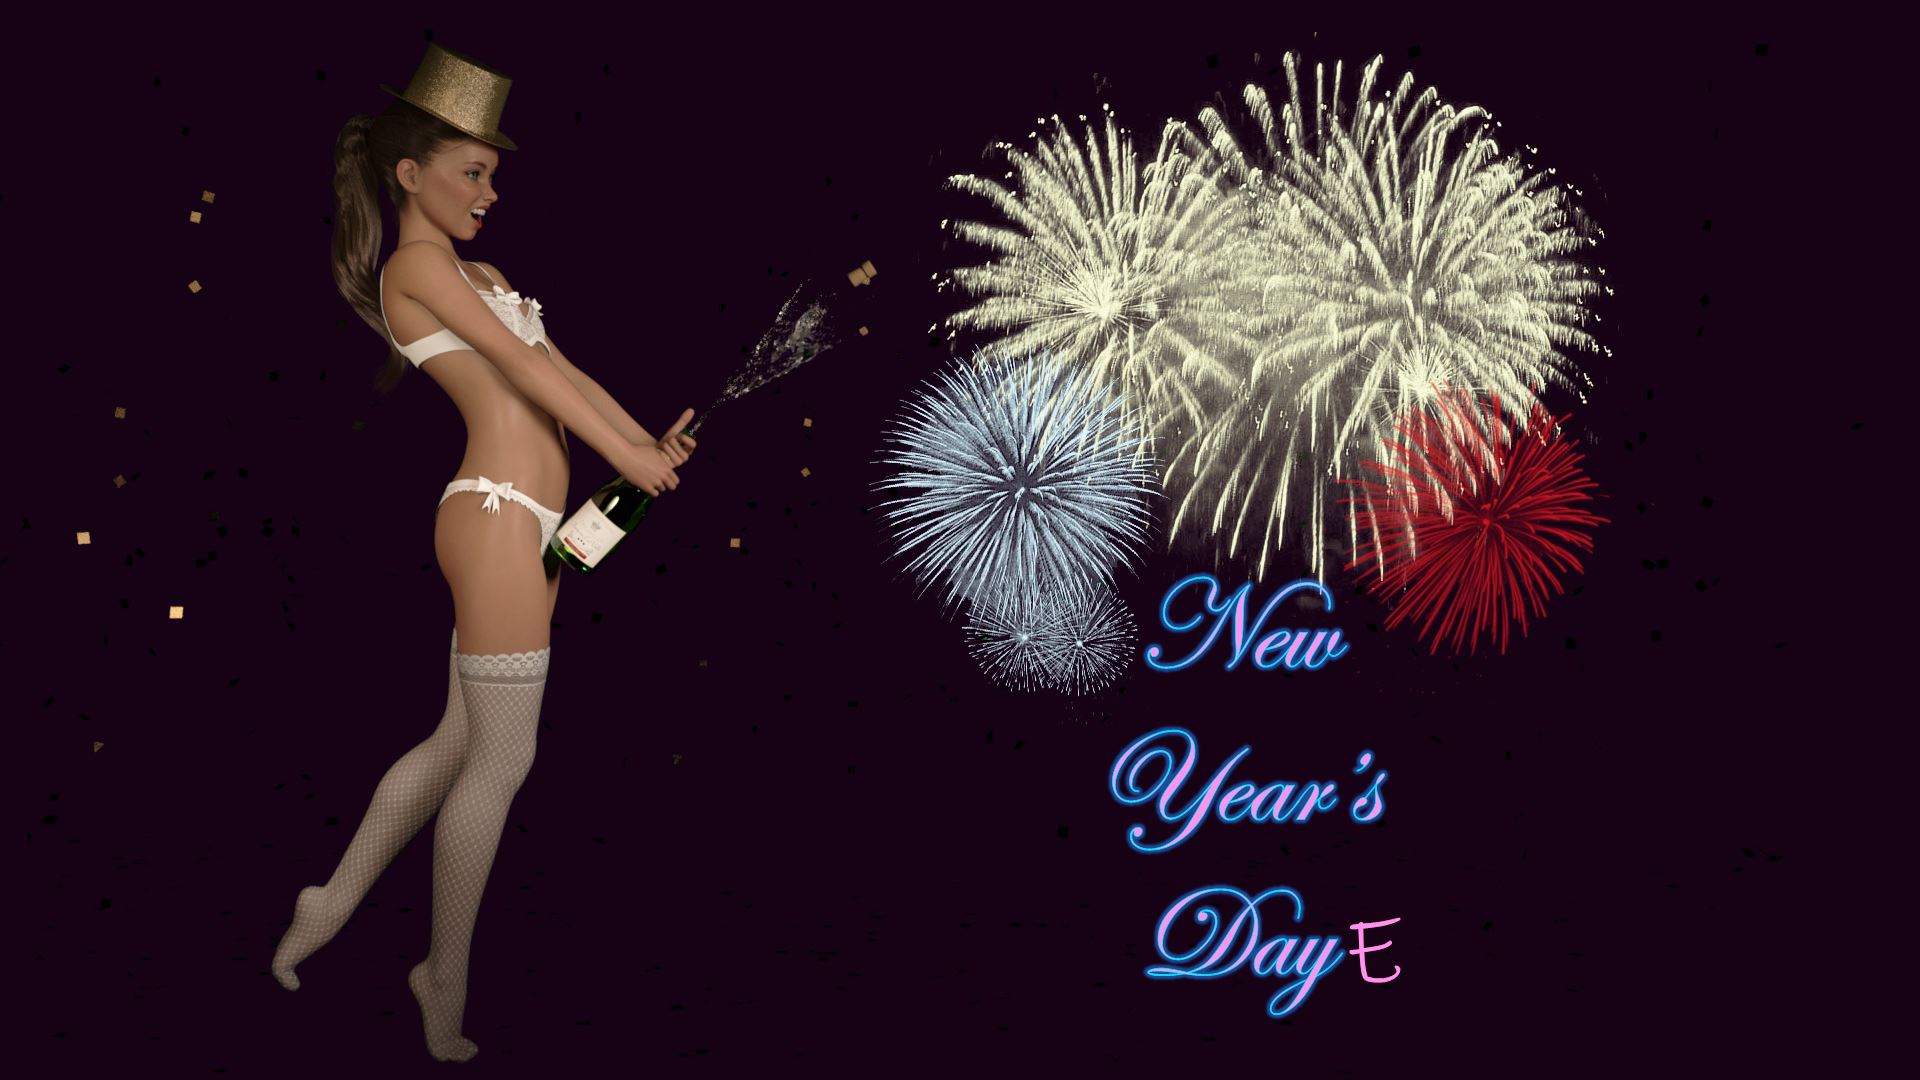 New Year’s Day(e) [Ongoing] - Version: 0.2.3